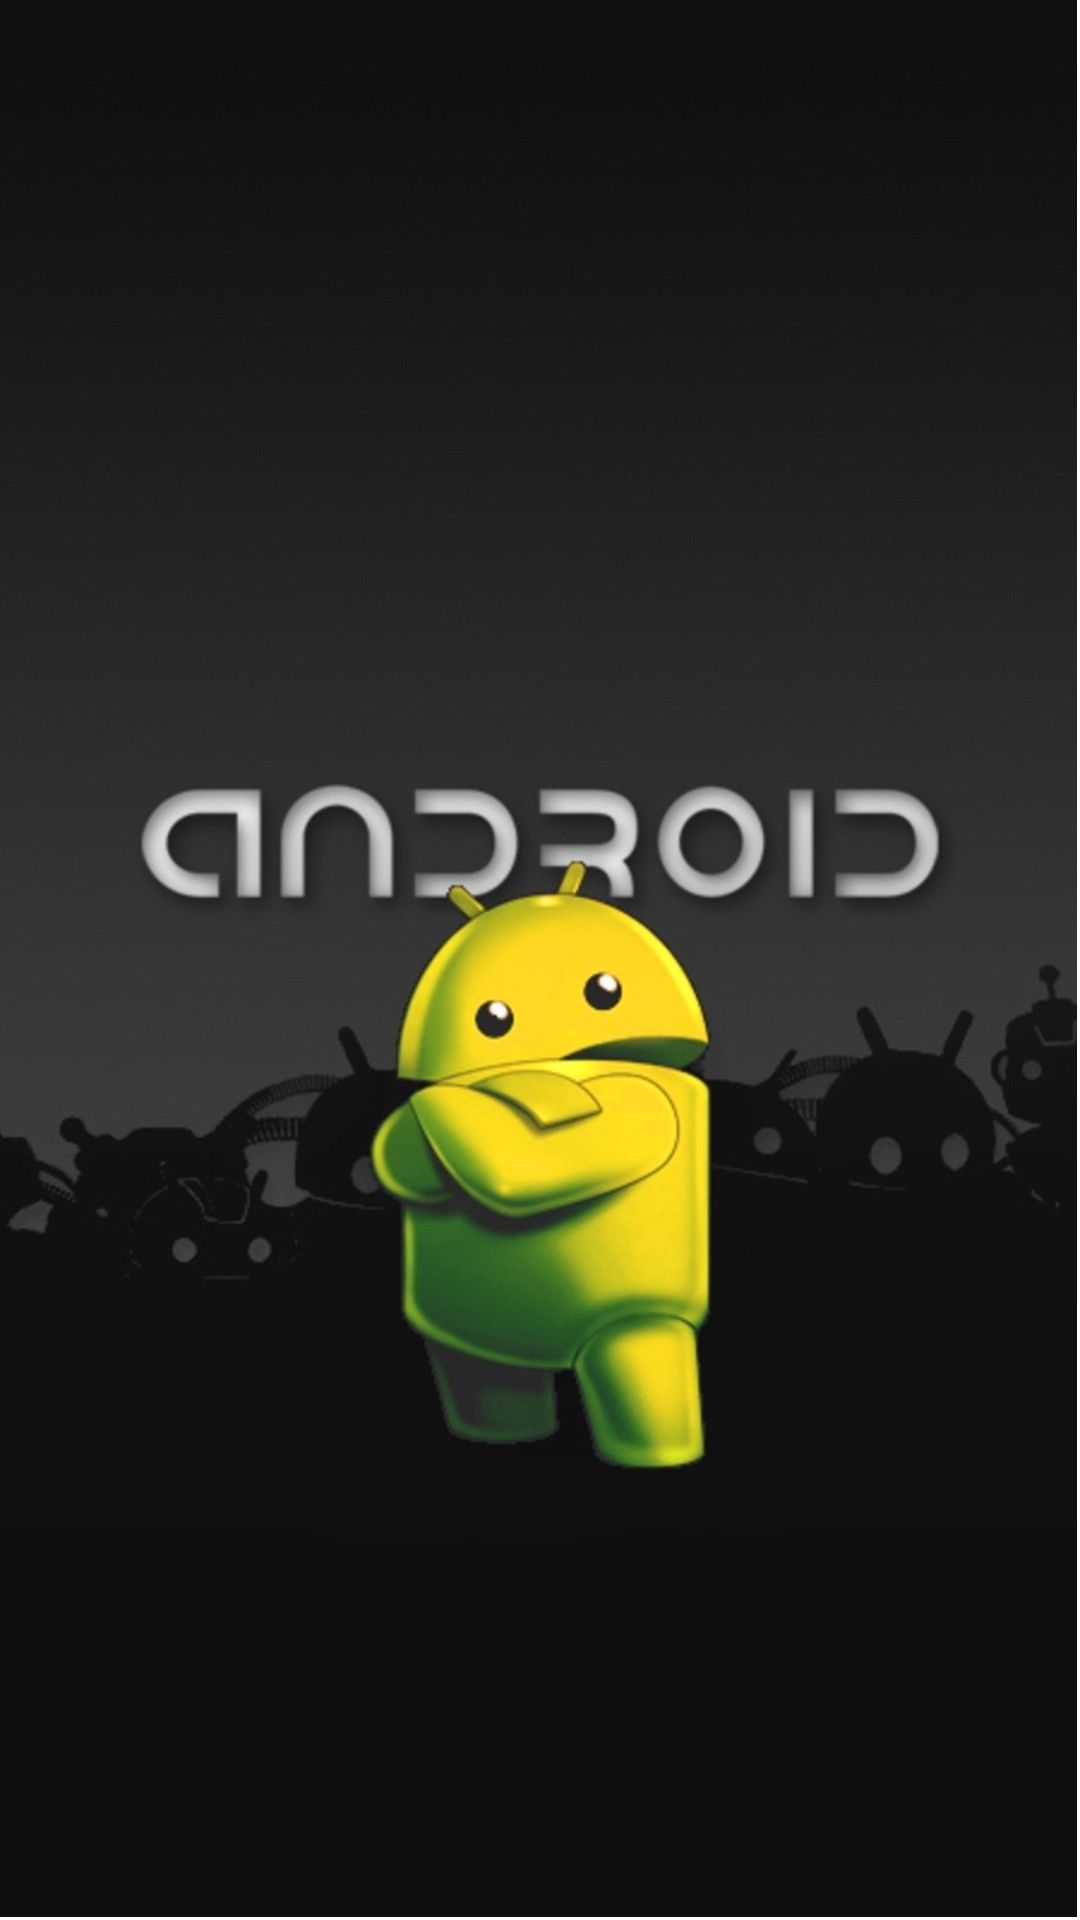 Android Logo Wallpaper. Best wallpaper android, Samsung galaxy wallpaper, Android wallpaper